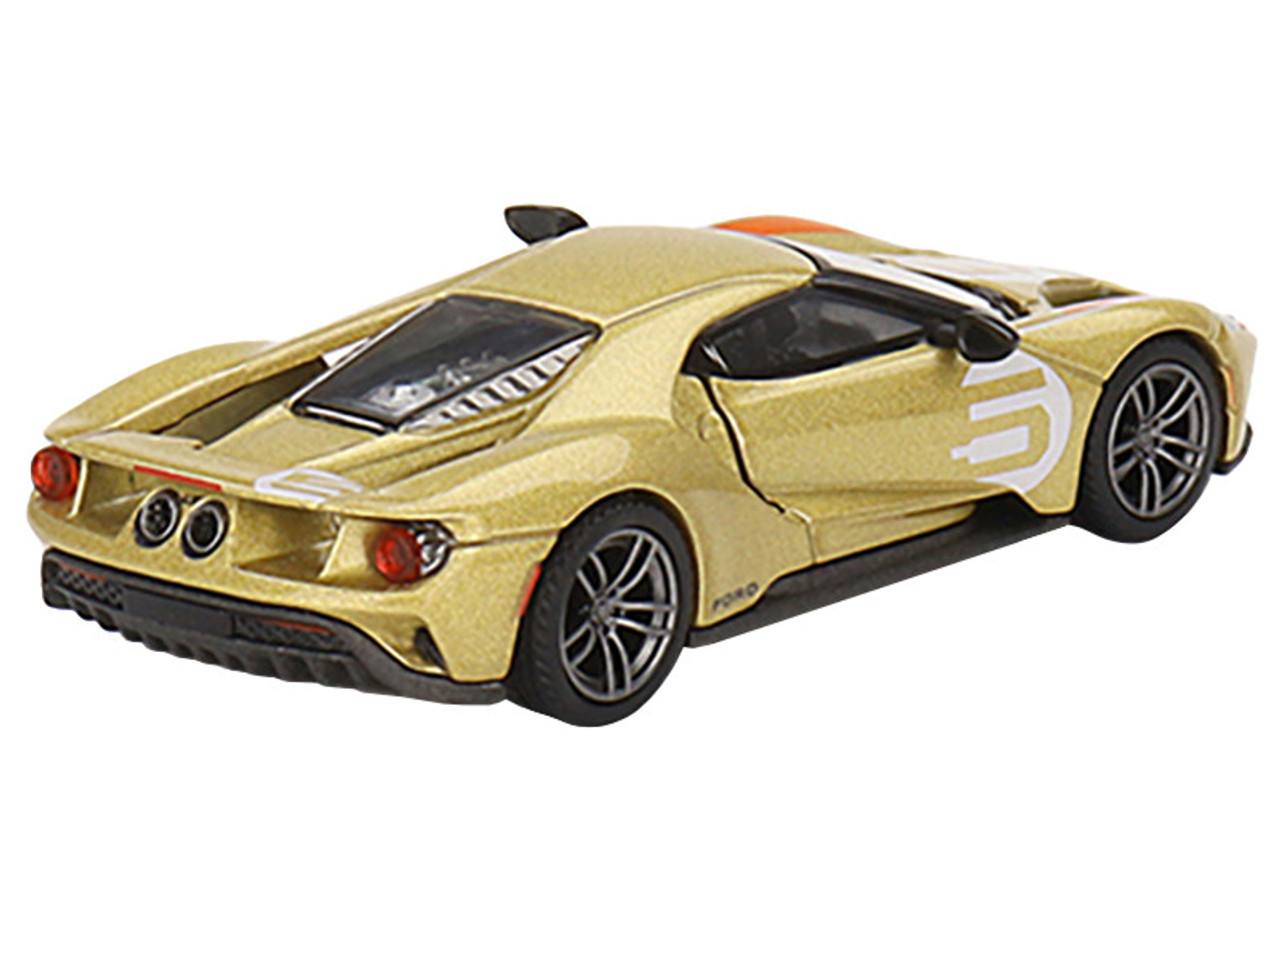 Ford GT #5 "Holman Moody Heritage Edition" Gold Metallic with Red Accents Limited Edition to 1800 pieces Worldwide 1/64 Diecast Model Car by True Scale Miniatures